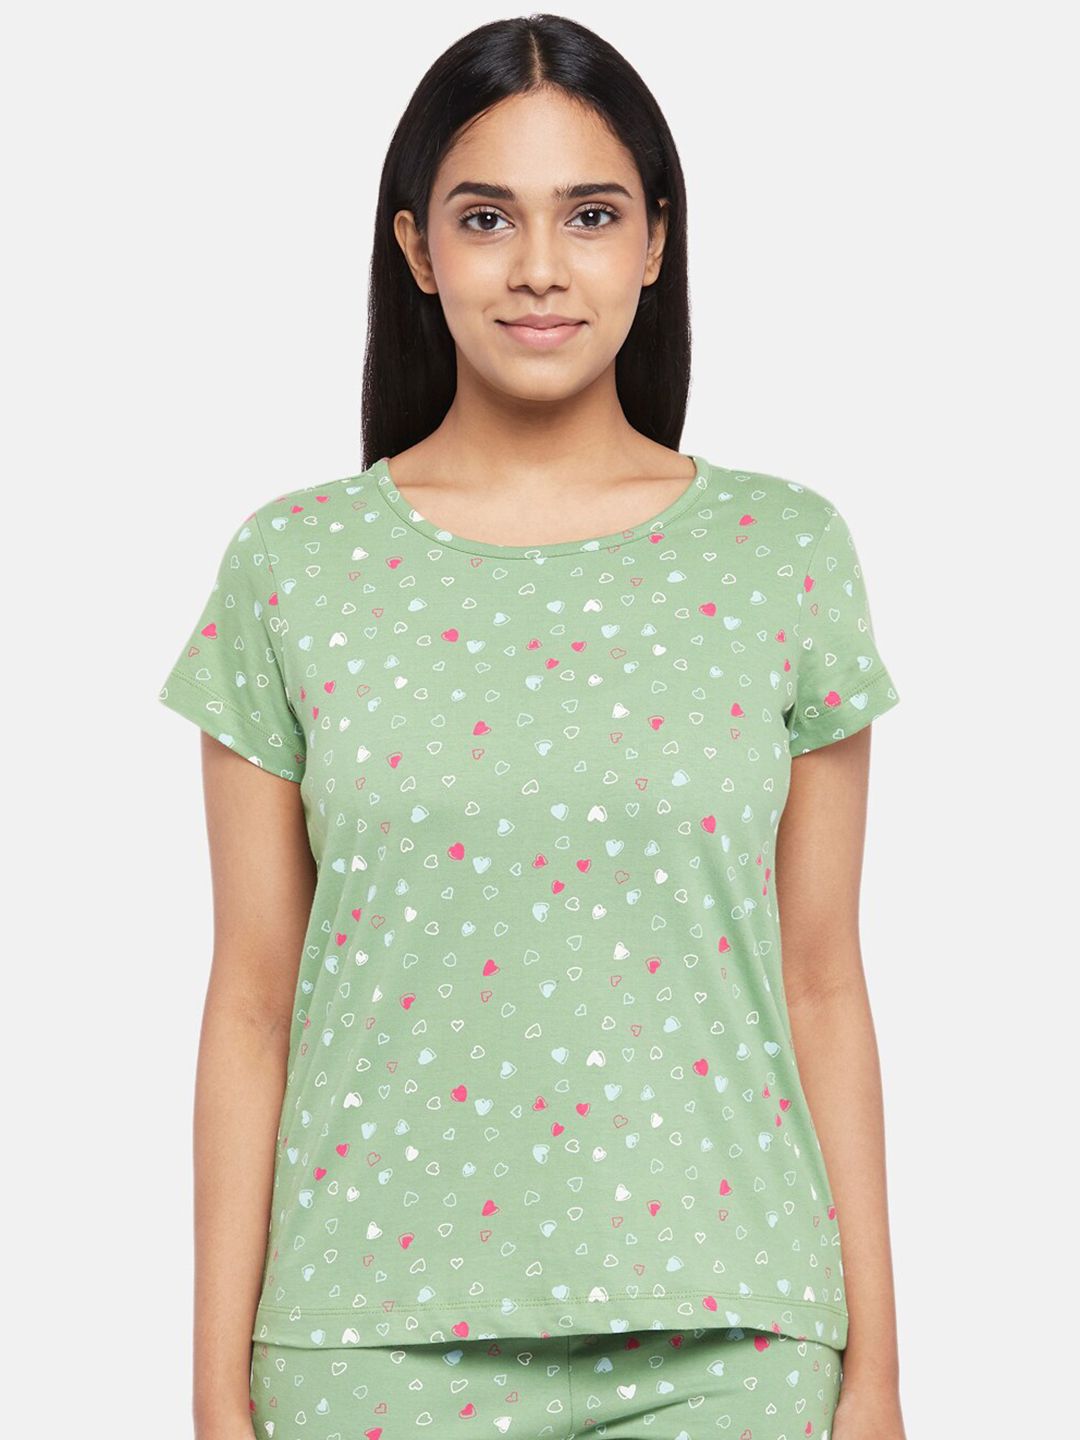 Dreamz by Pantaloons Women Olive Green & Pink Conversational Printed Lounge T-shirt Price in India